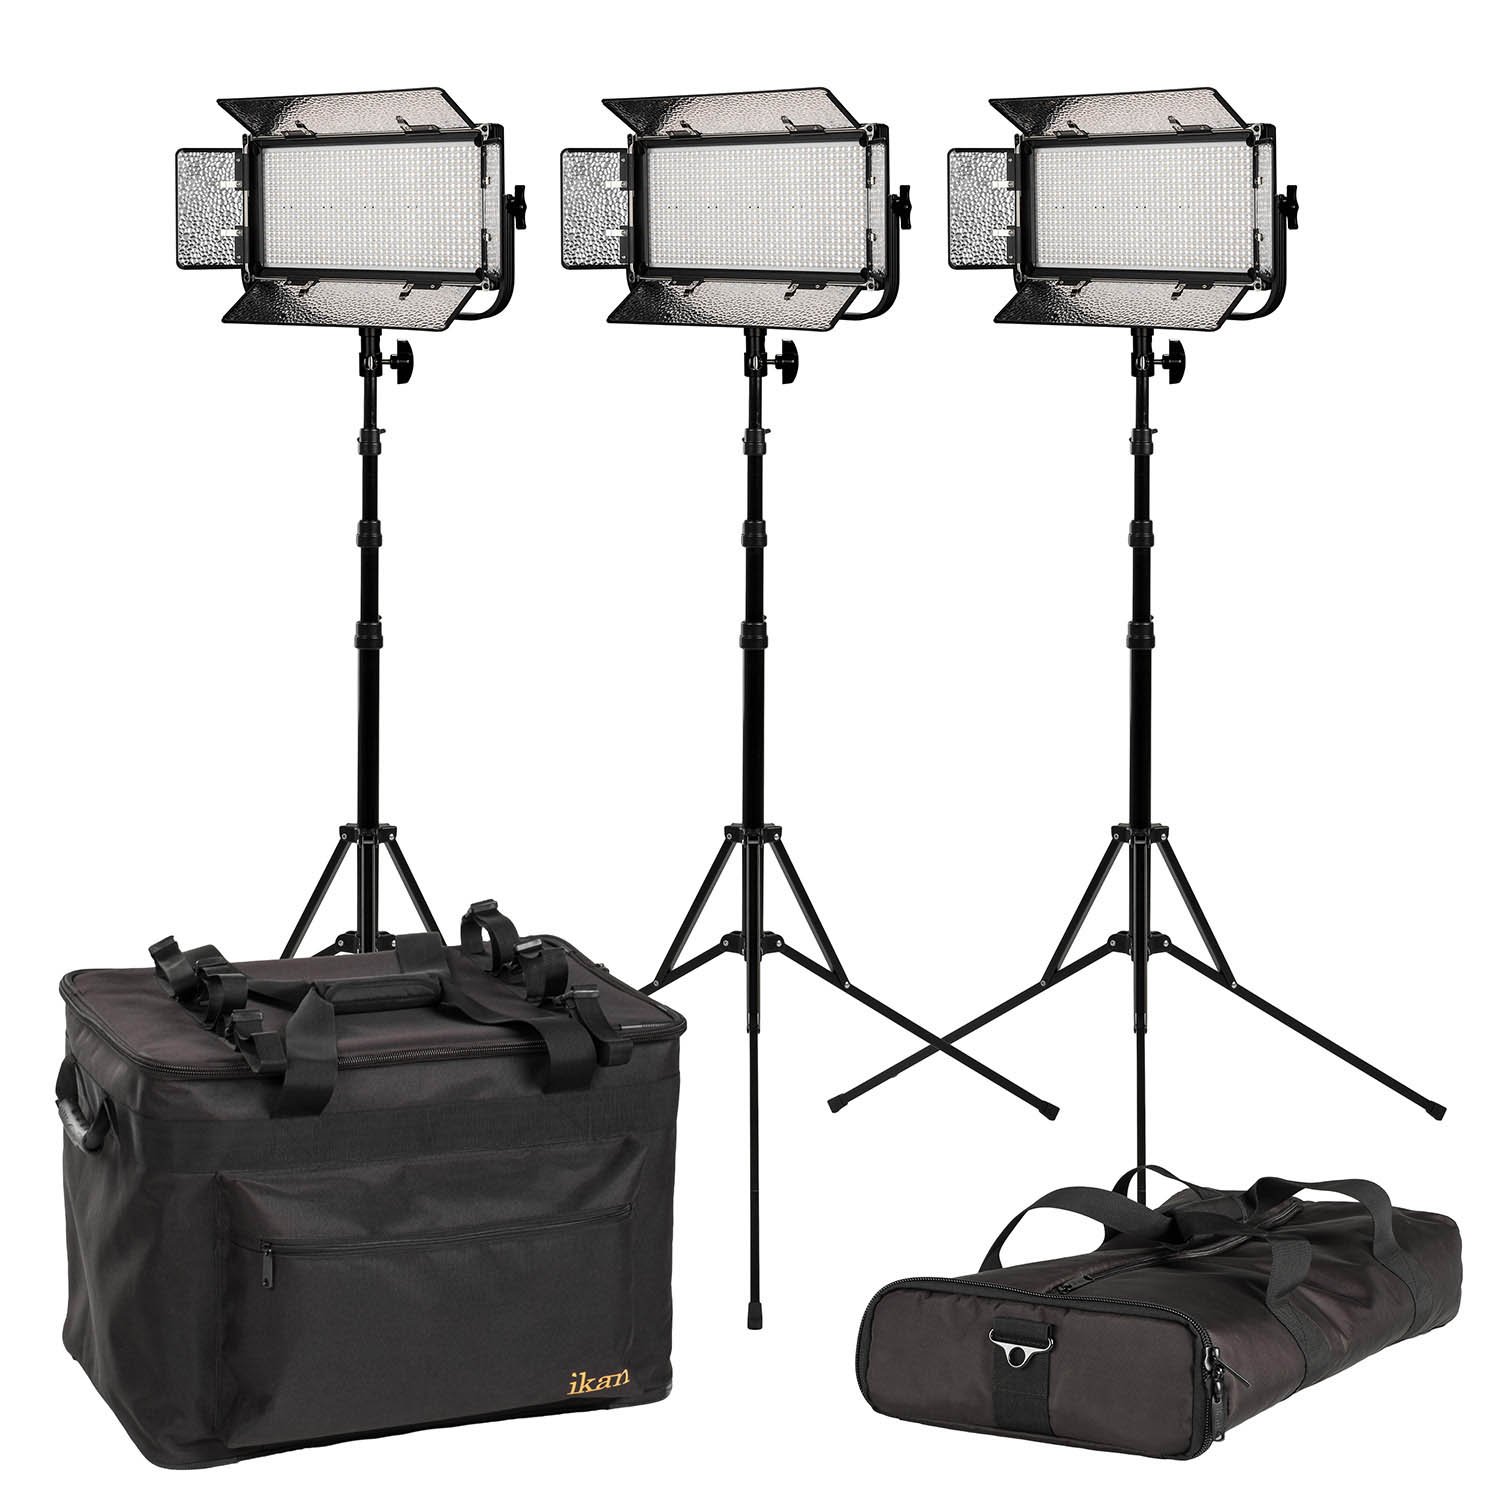 Mylo Bi-Color 3-Point LED Light Kit w/ 3 x MB8, Includes DV Batteries,  Stands, and Bags